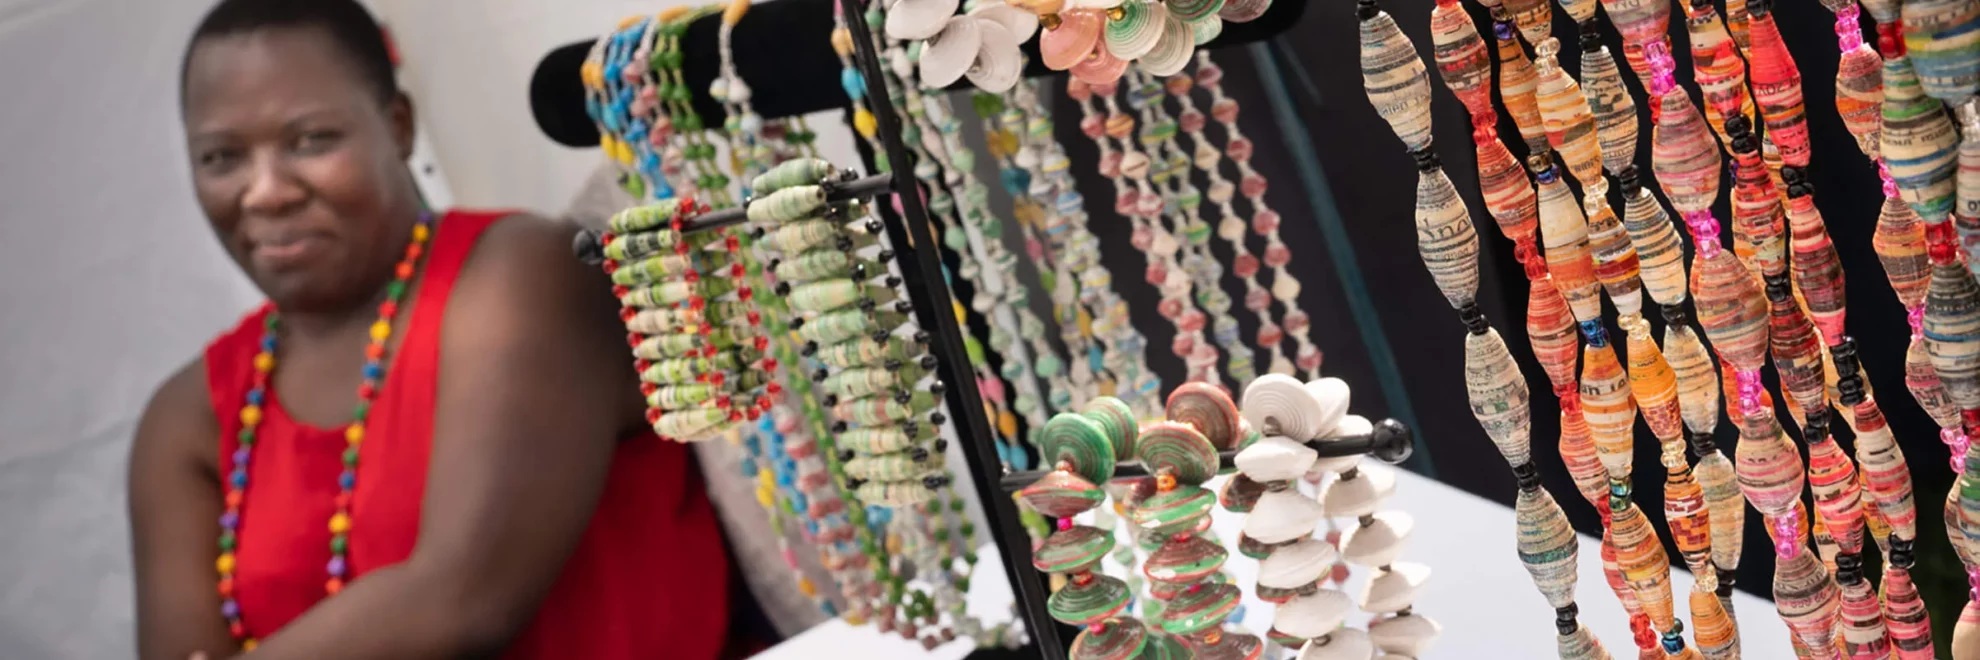 A woman looks at jewelry she is selling at Festival of Spring.